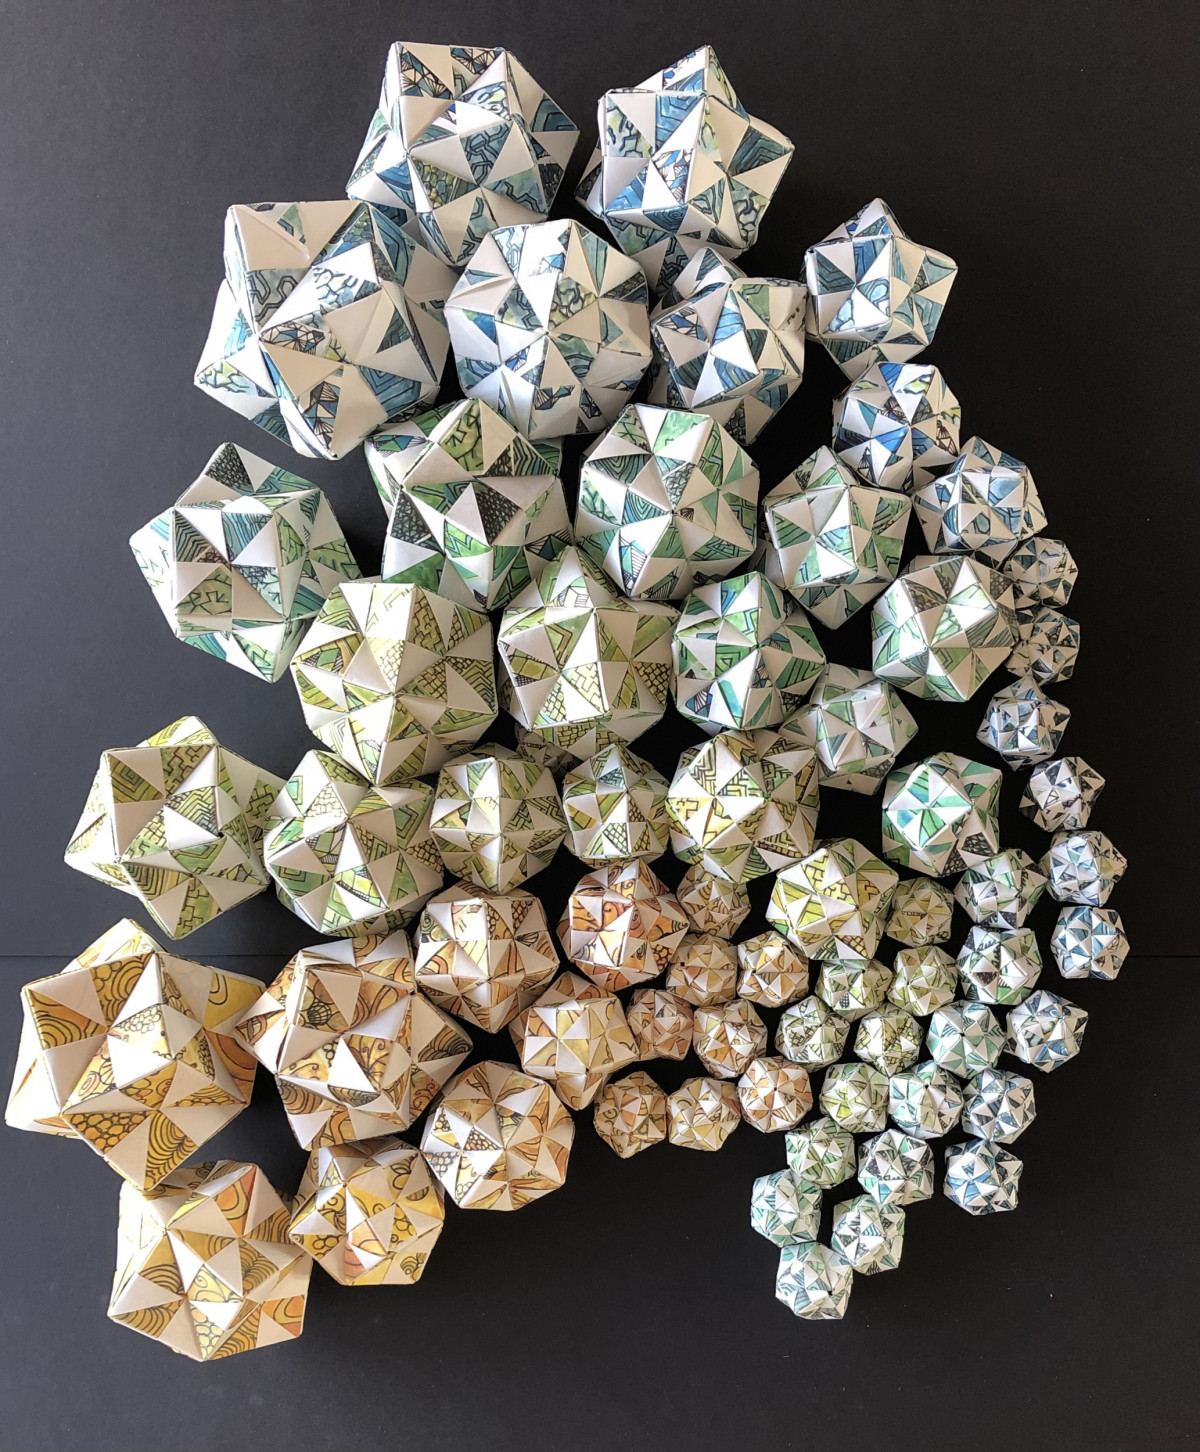 Origami polygons resembling naturally occurring fractals